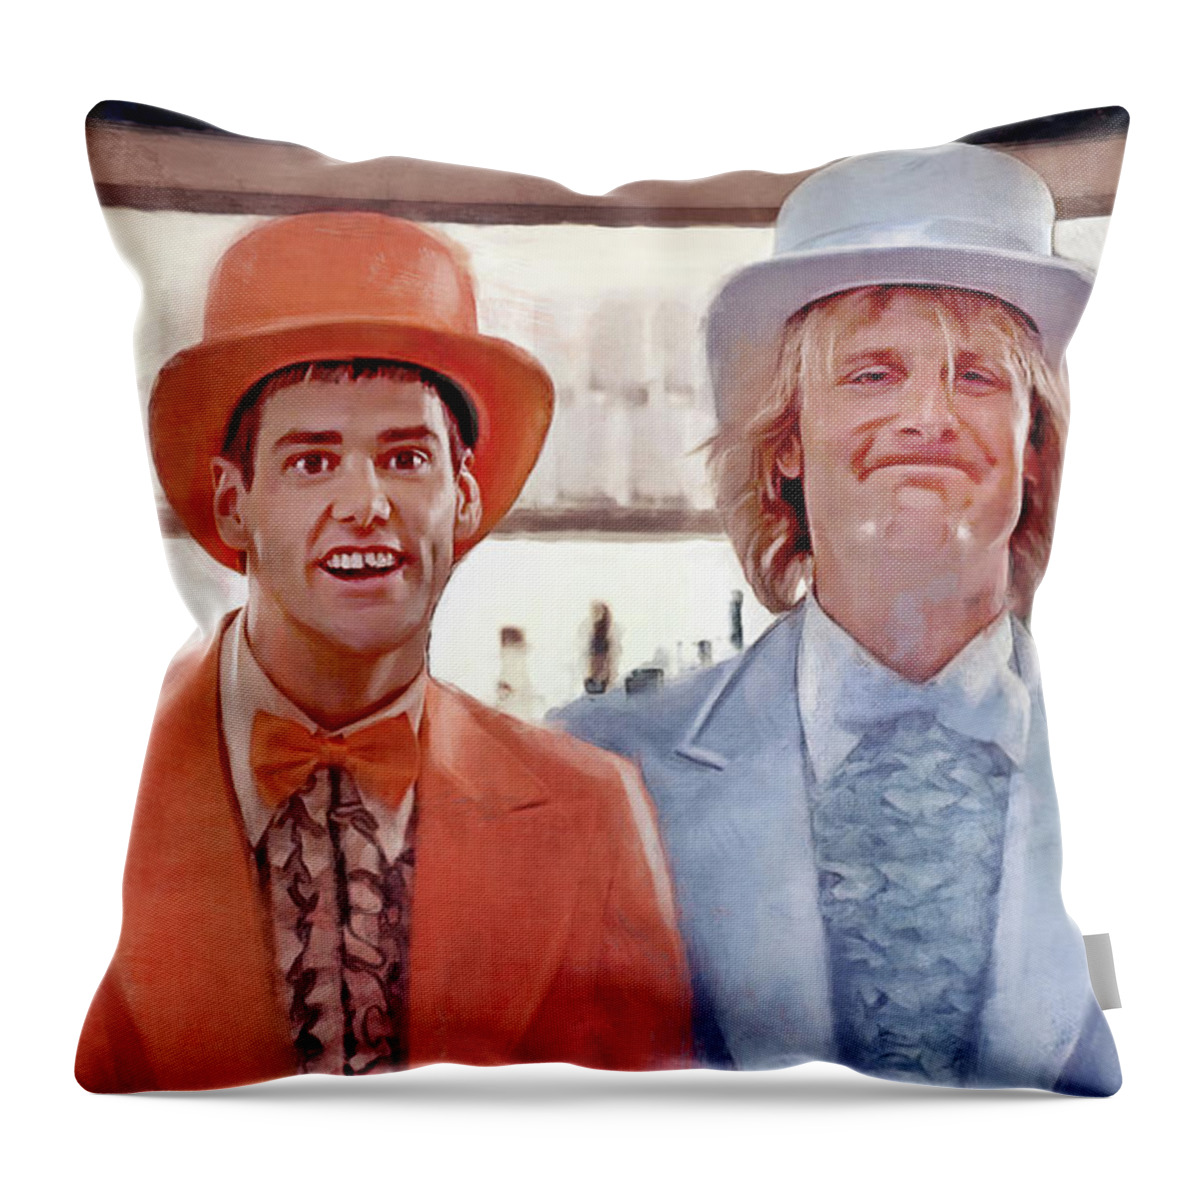 Llloyd and Harry In Tuxedo Suits From Dumb and Dumber Throw Pillow by  Joseph Oland - Pixels